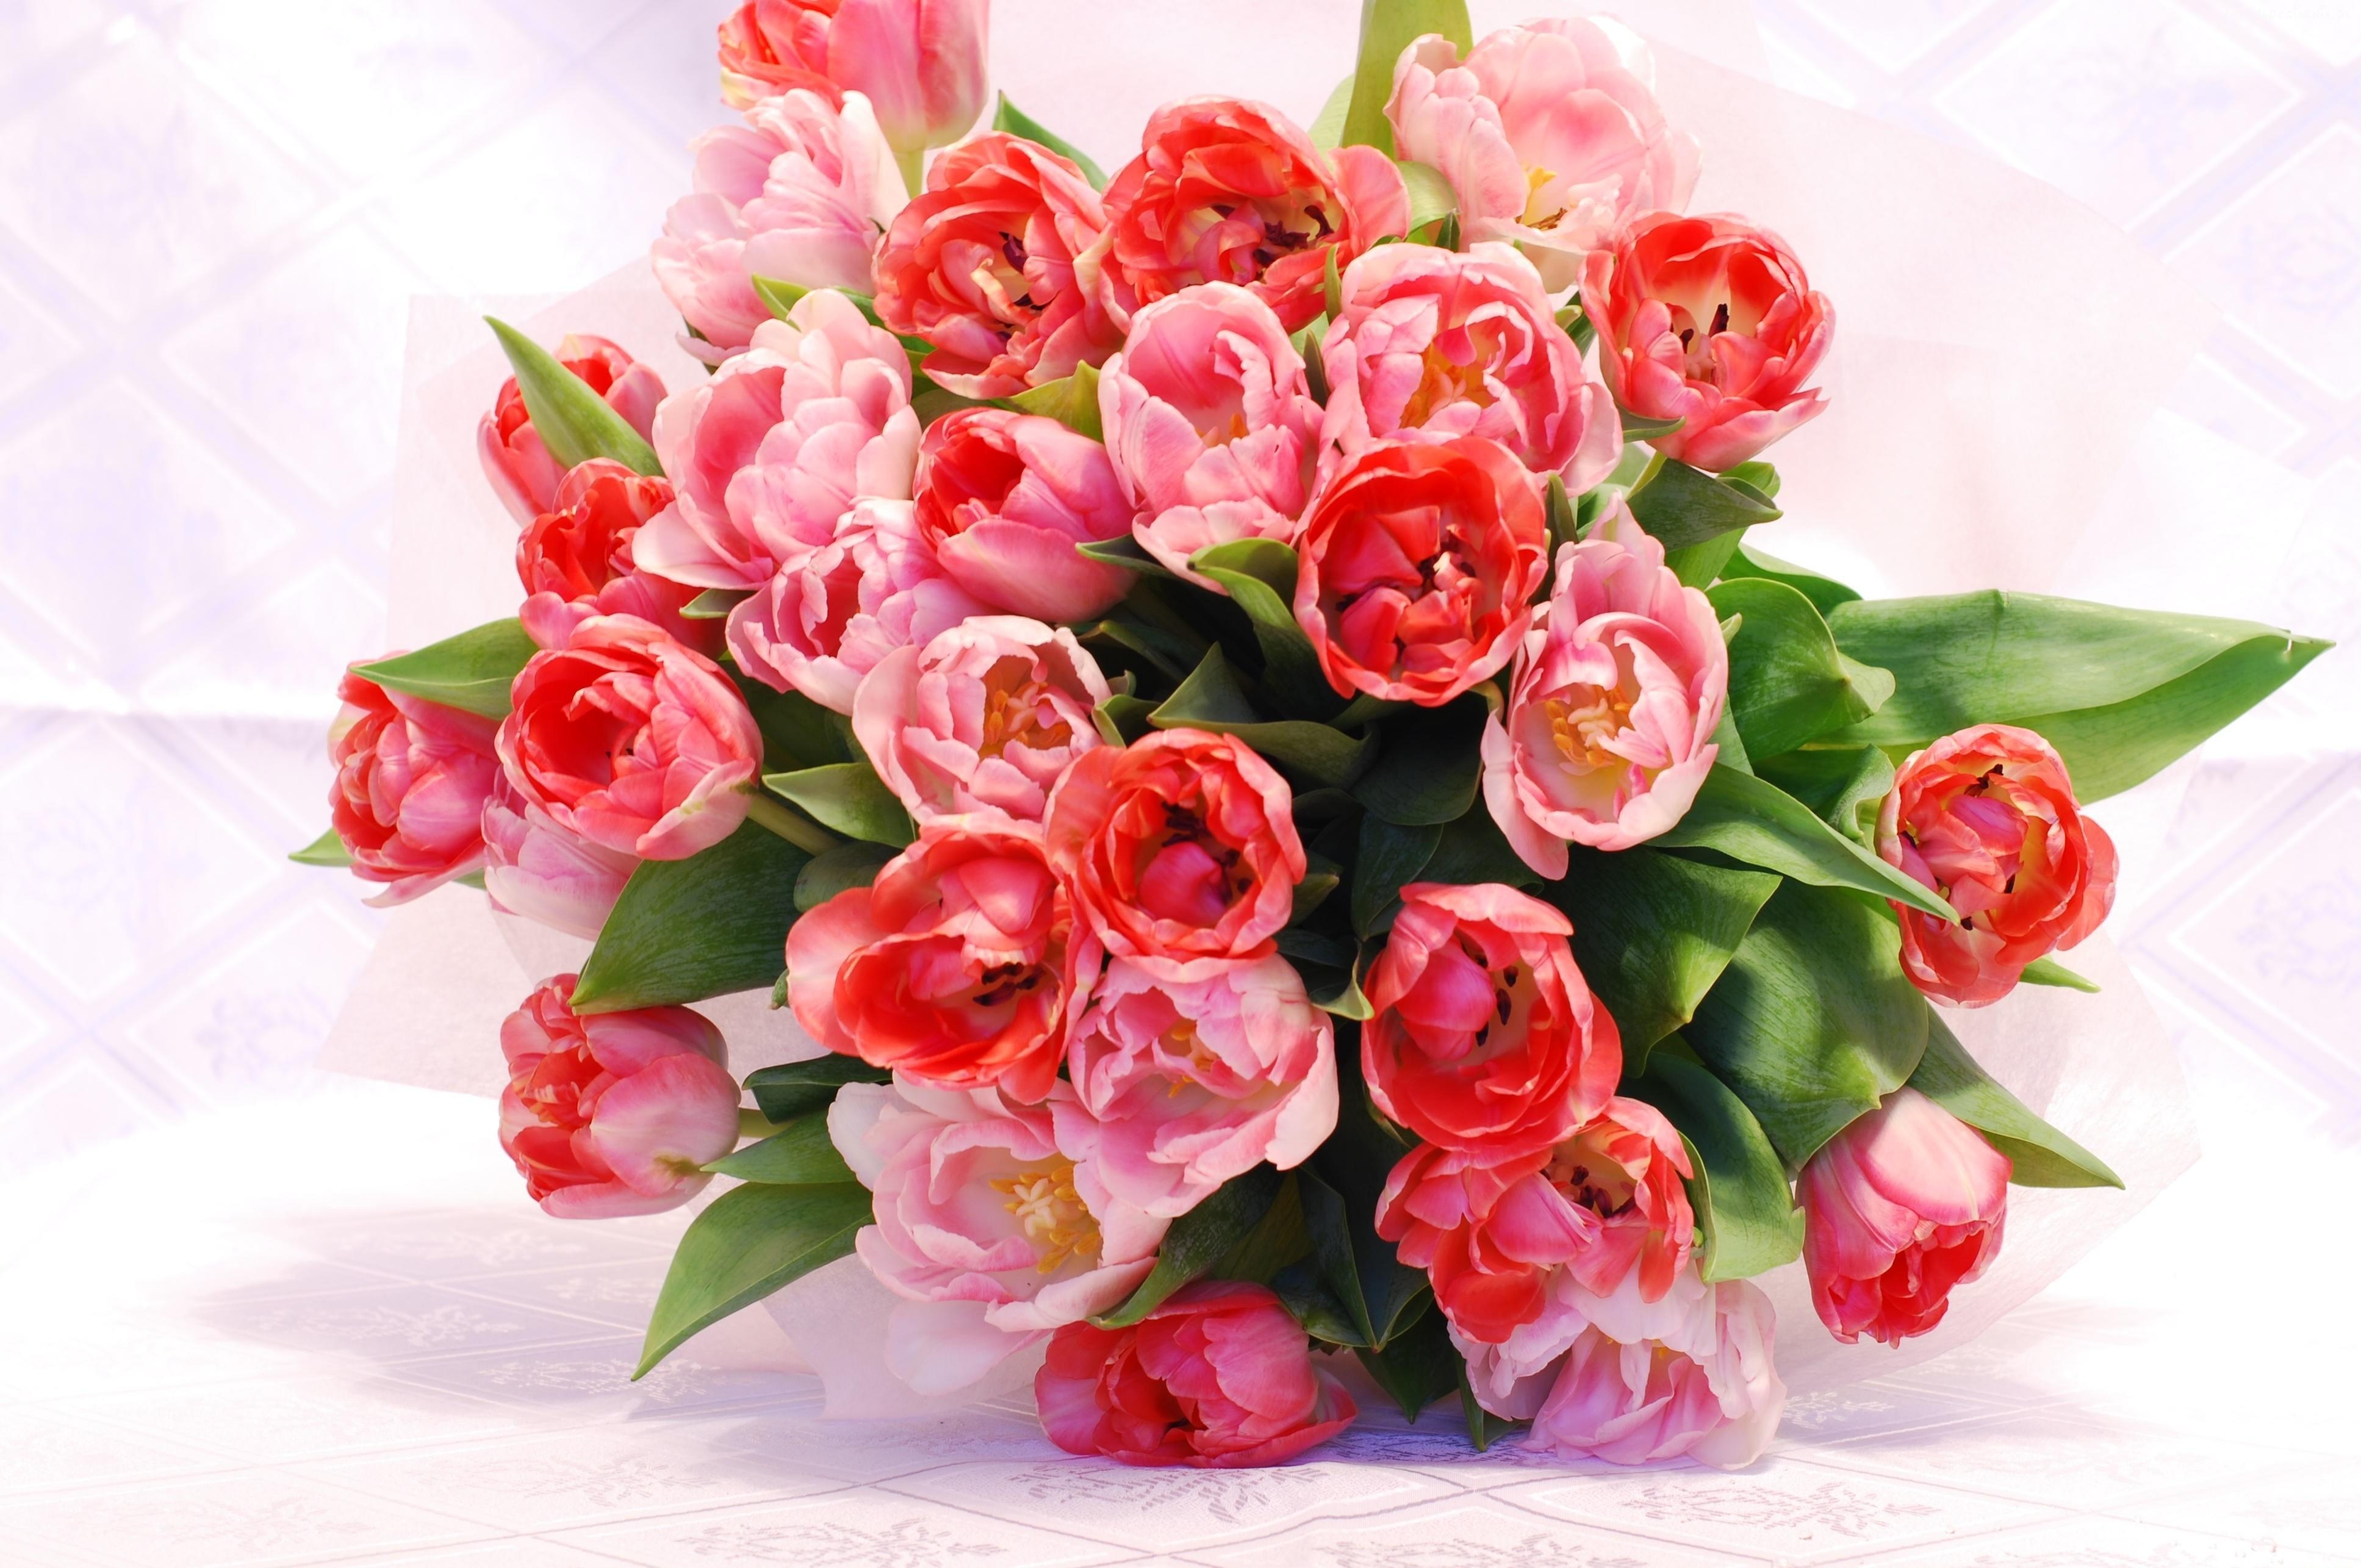 bouquet, tulips, flowers, disbanded, loose, tenderness, handsomely, it's beautiful